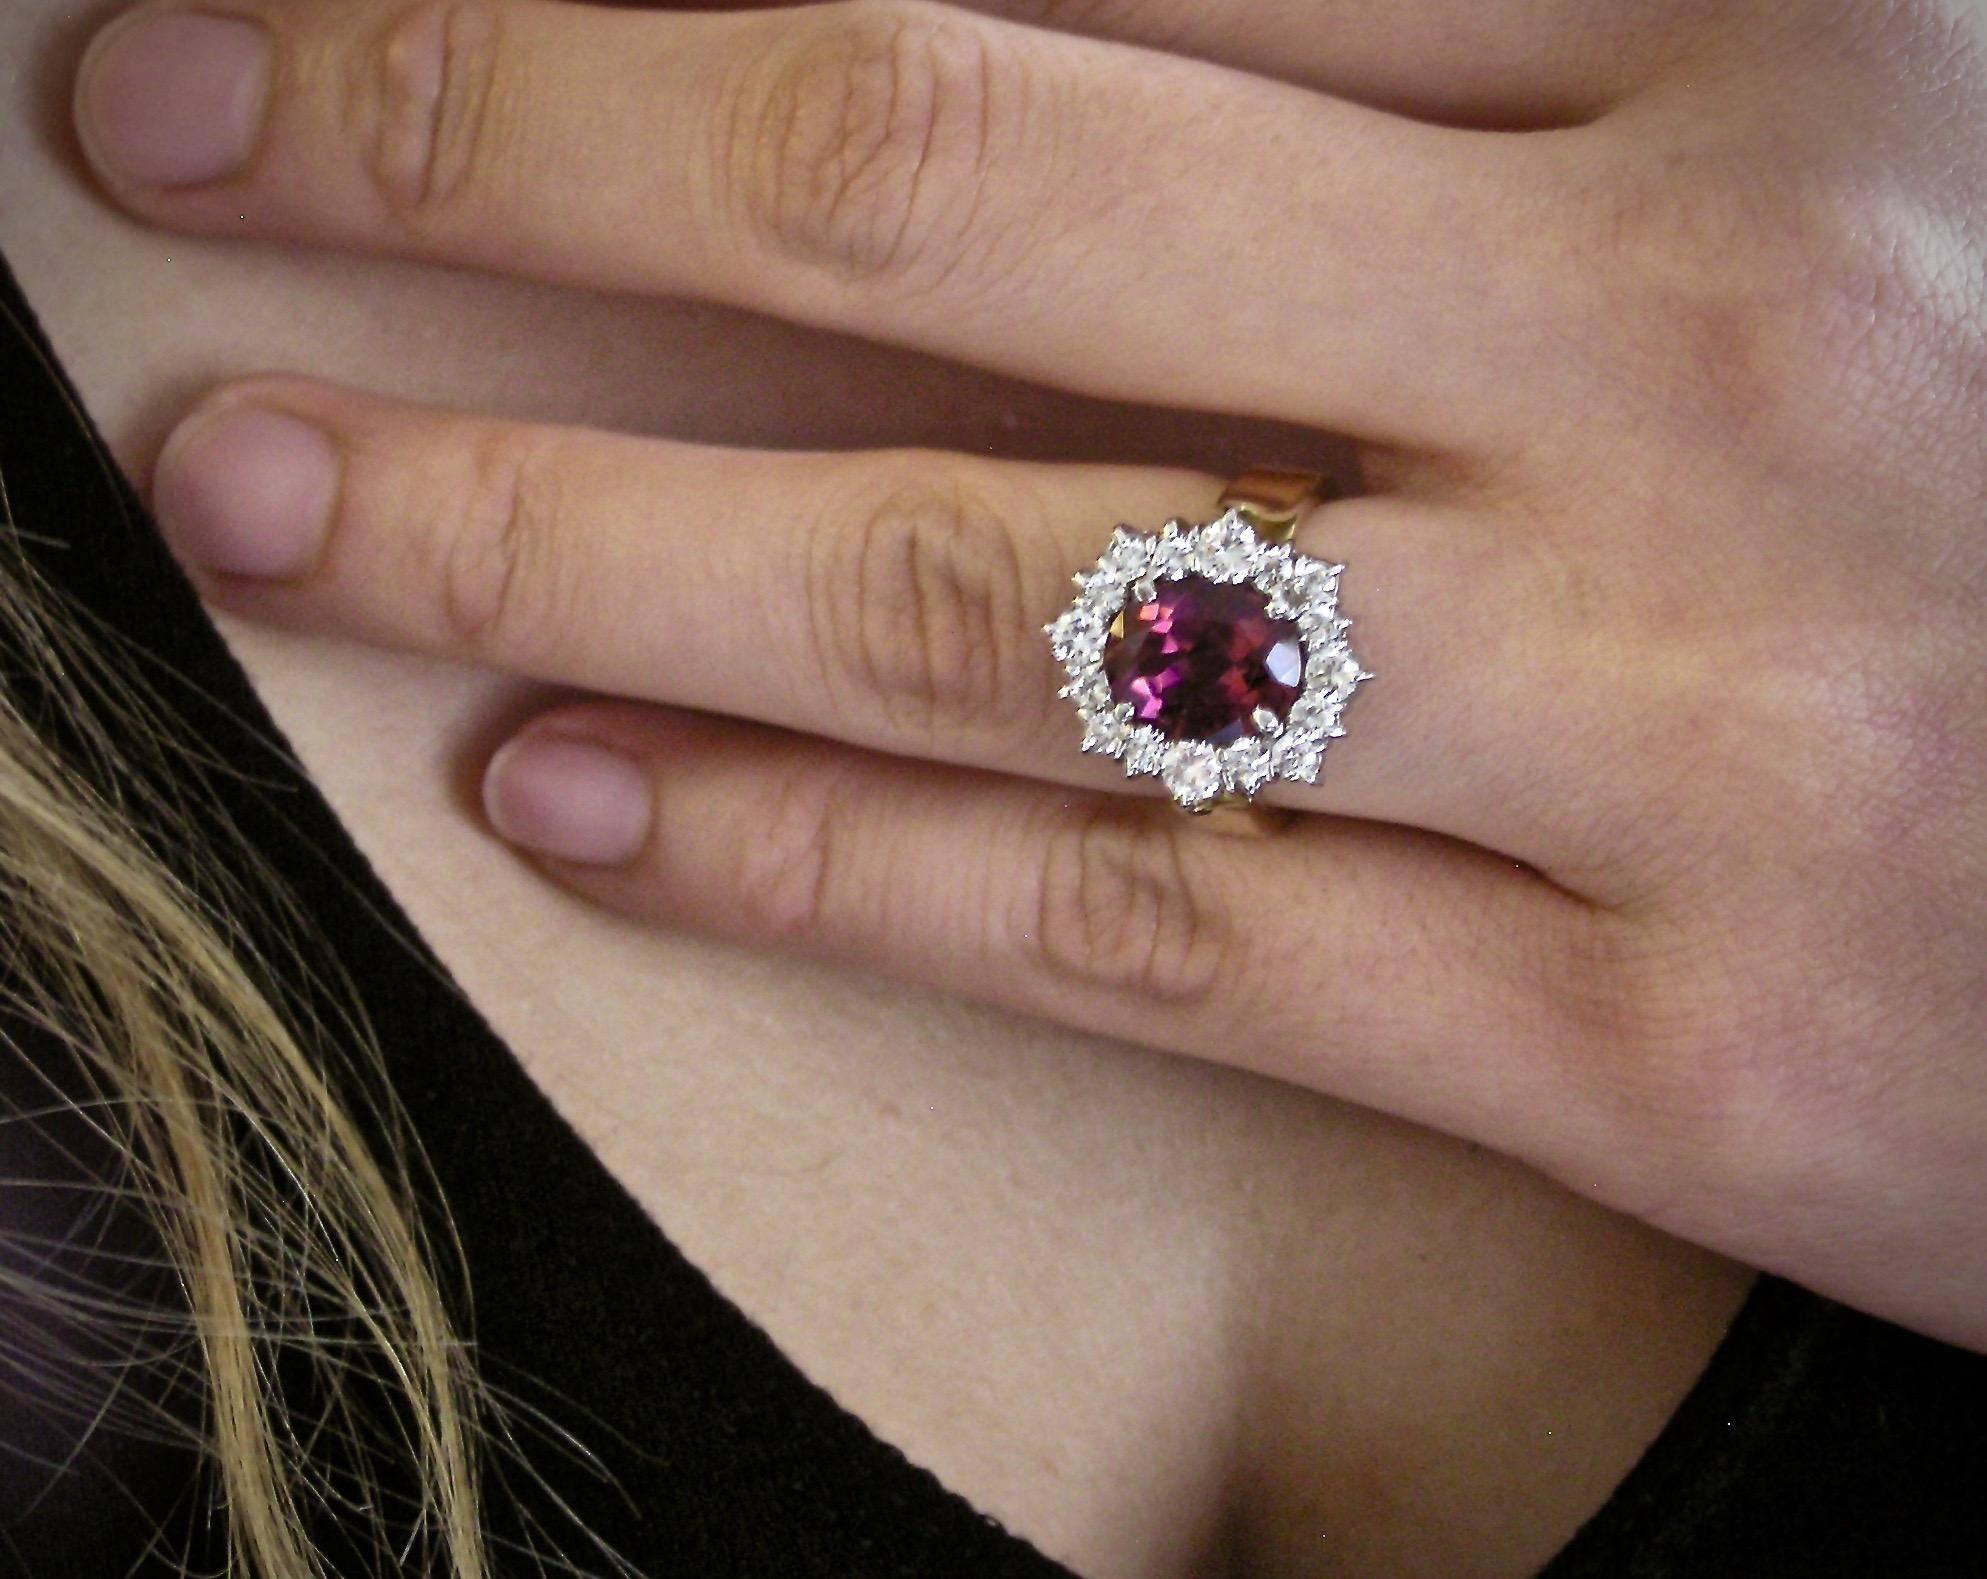 Platinum ring, hand fabricated. The 3.60 carat oval-cut Rubellite Tourmaline of excellent quality, exhibiting a very saturated red-purple color with just a hint of peach. Think raspberry! It has very high intensity and sparkle! Rubellites such as